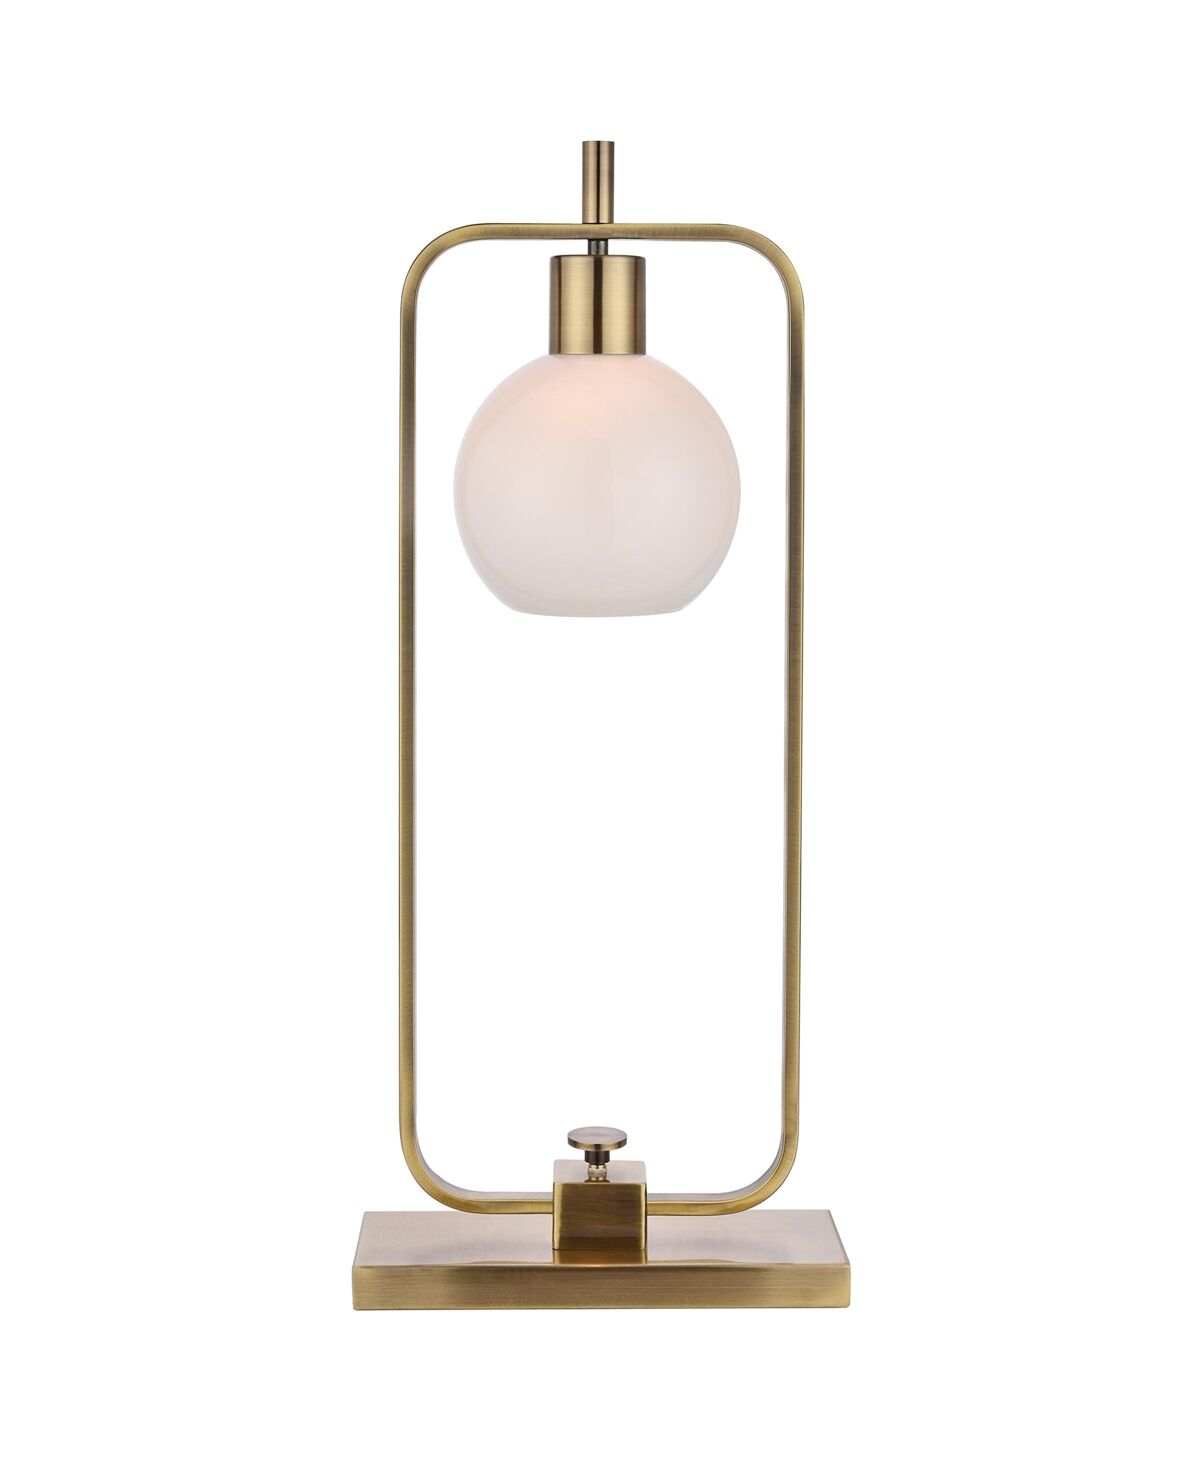 Harp & Finial Crosby Table Lamp - Antique Brass